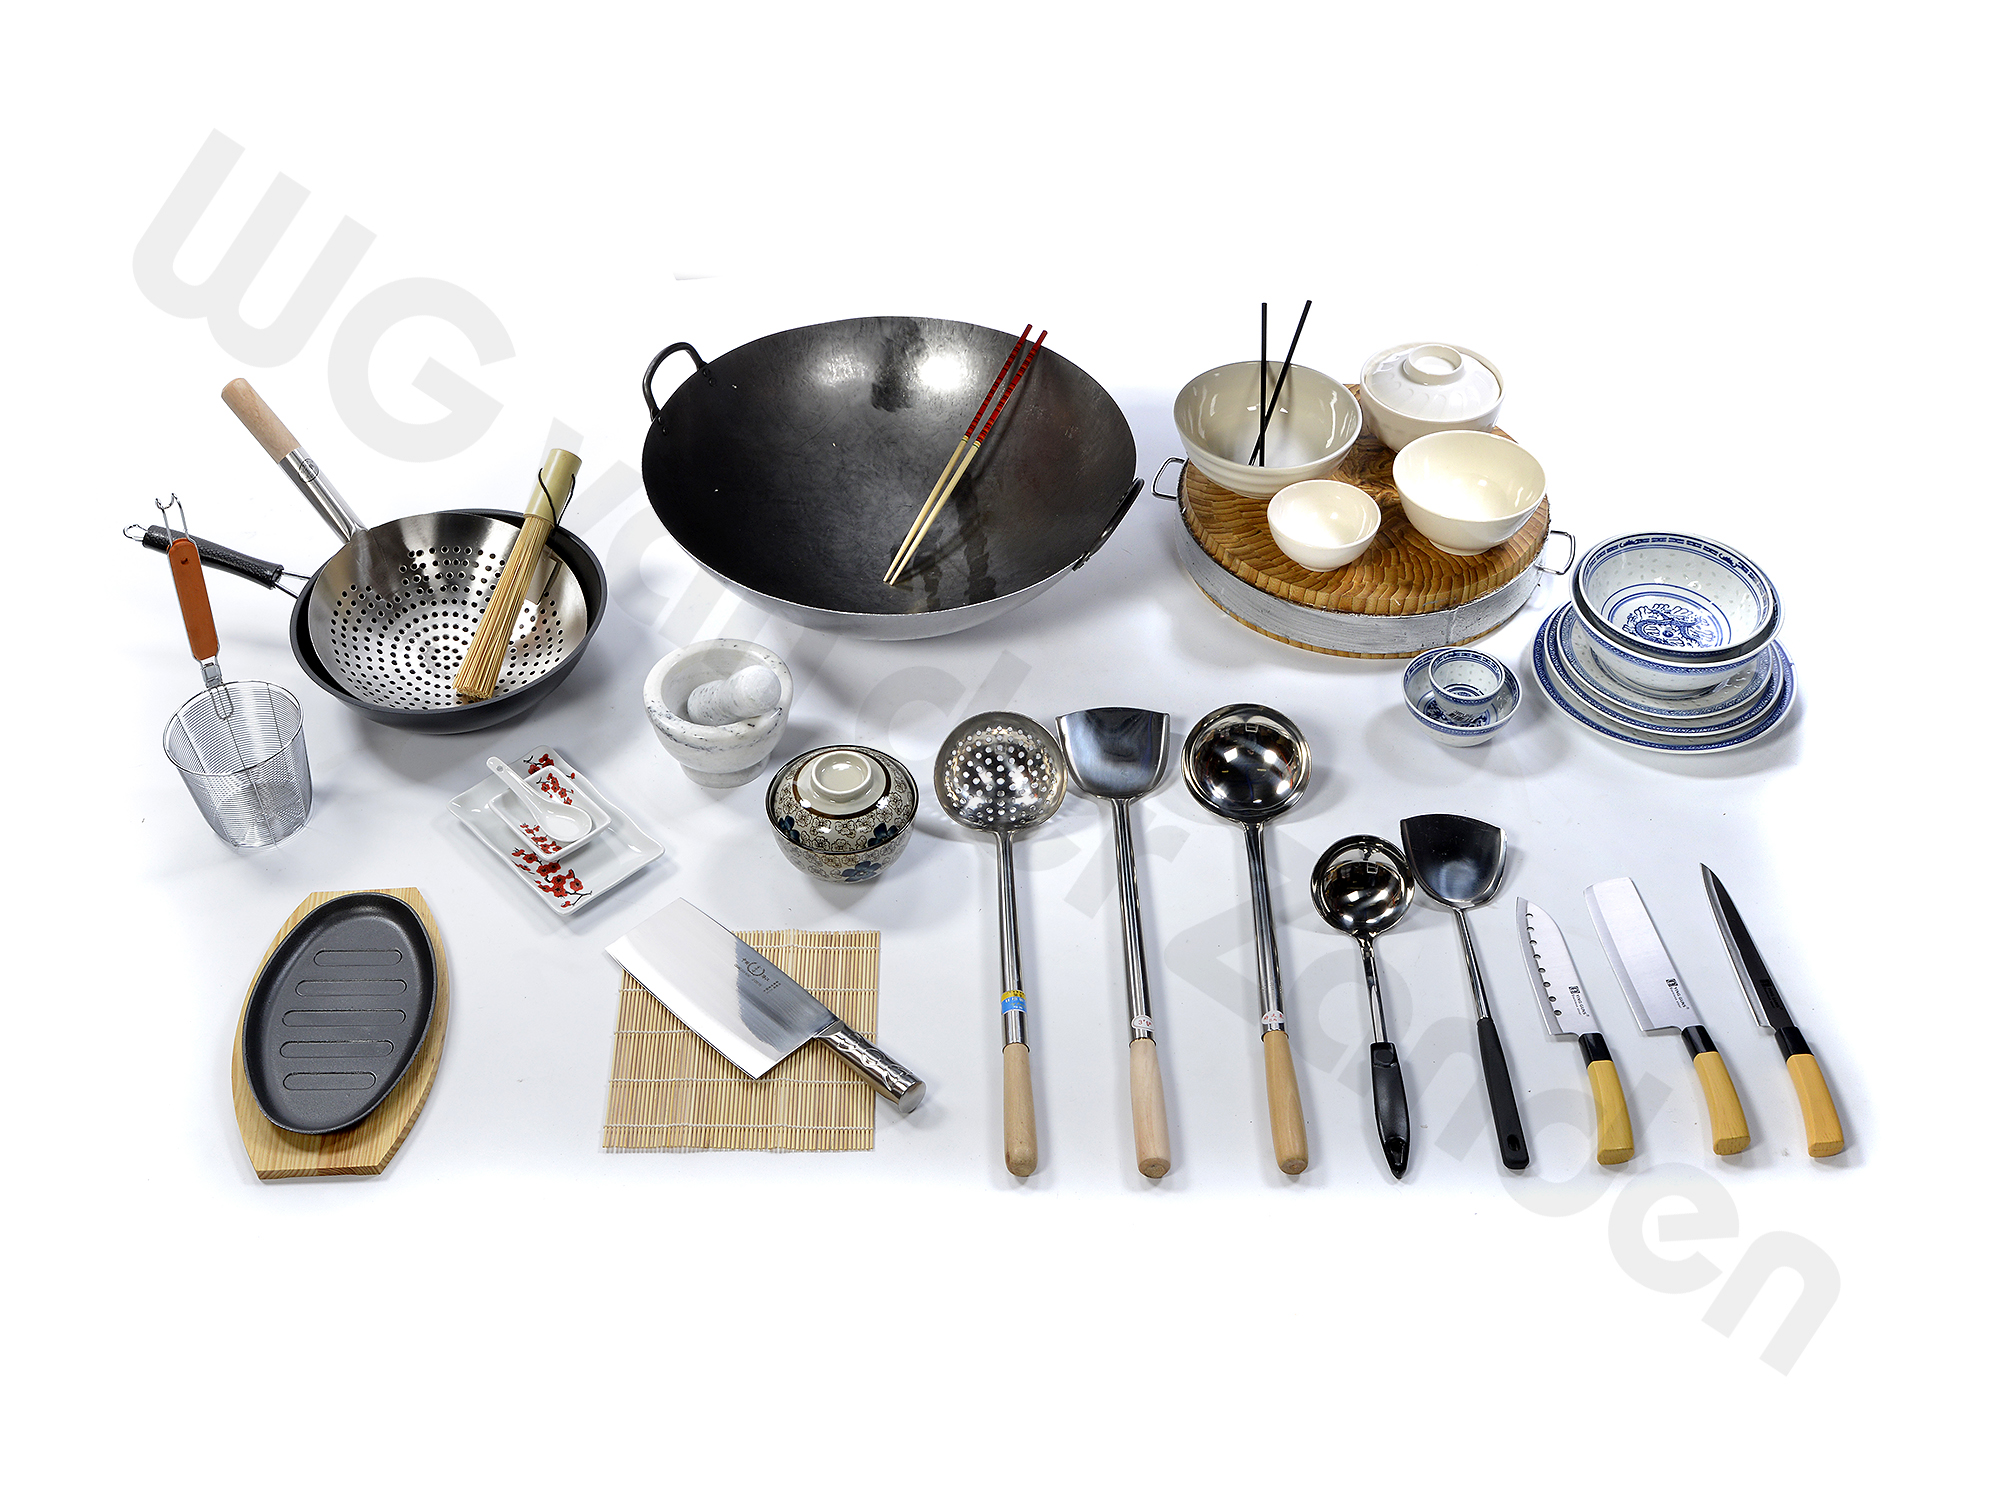 Asian cooking utensils and crockery